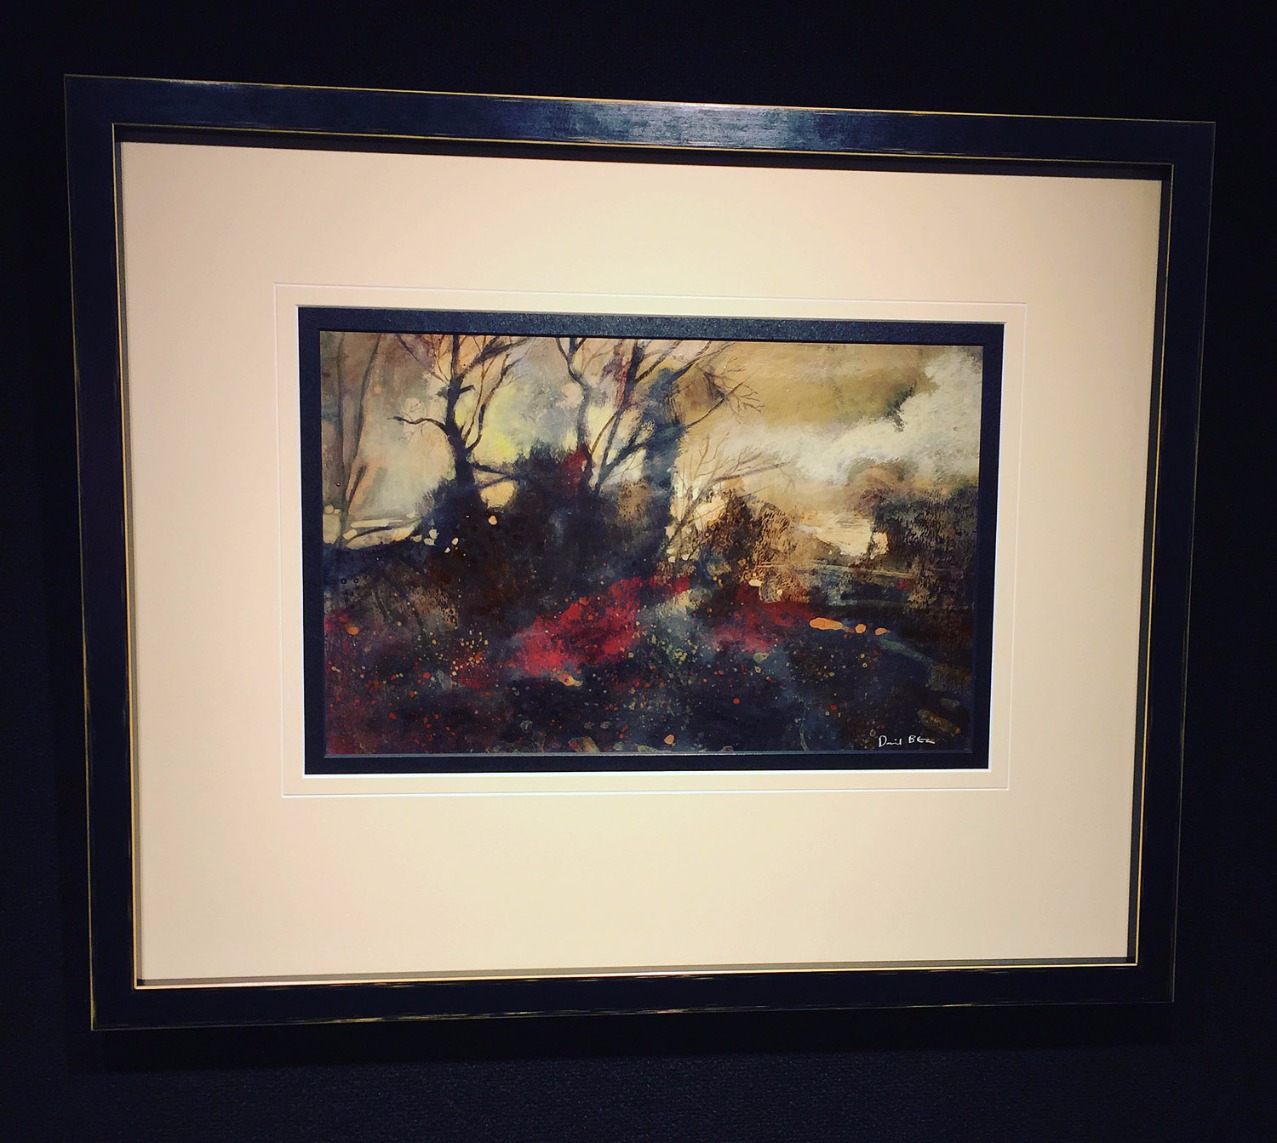 The Scorched Earth by David Bez, Landscape